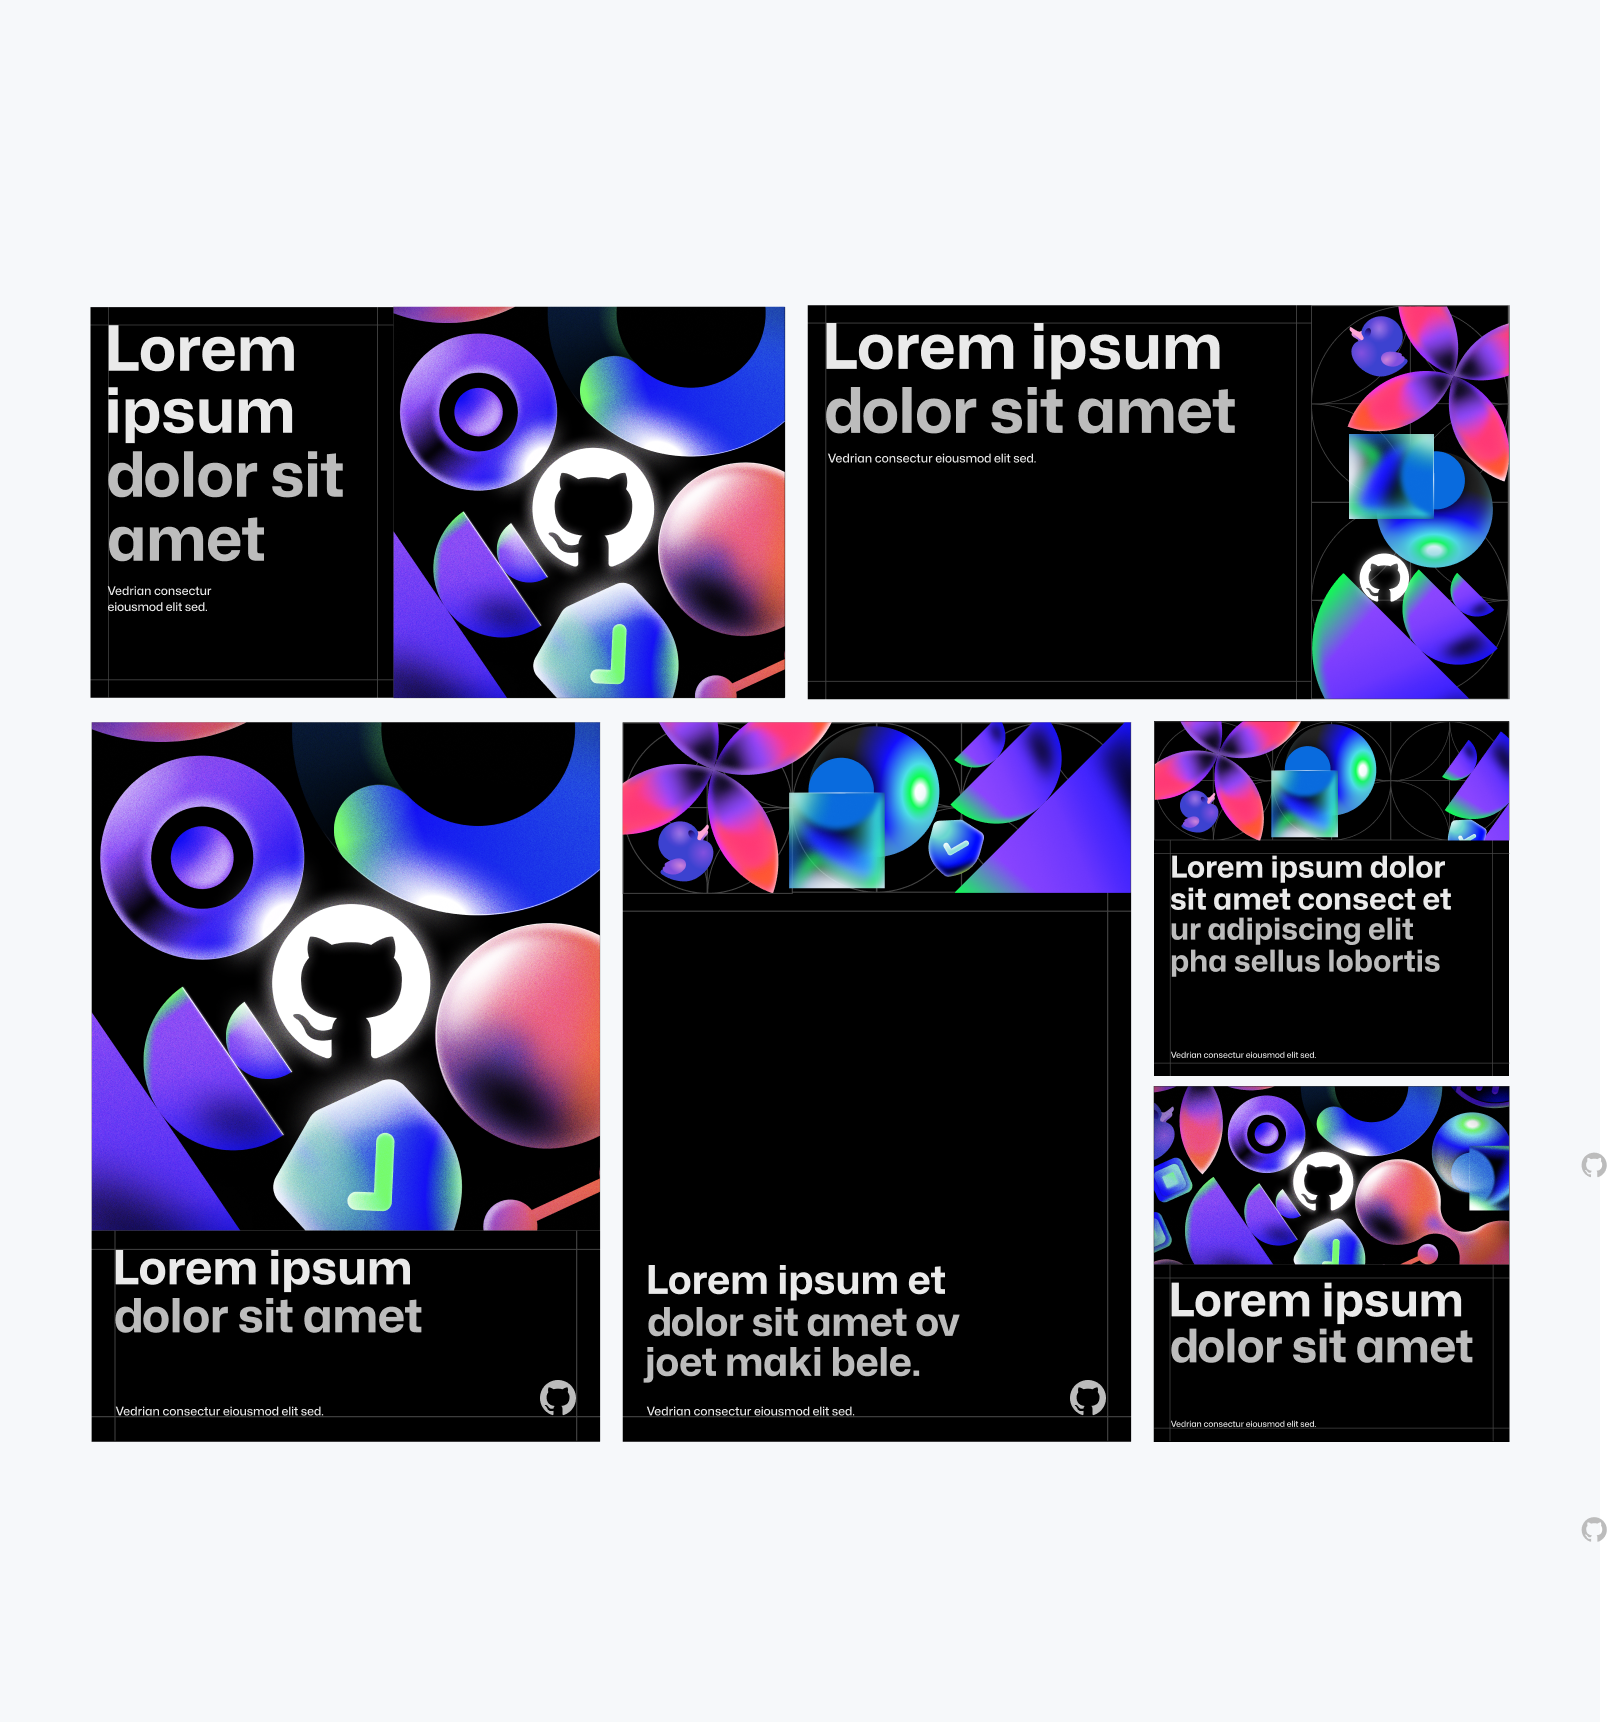 A series of 6 compositions ranging from portrait to landscape to square. Each composition features lorem ipsum placeholder text paired with an abstract illustration in its own rectangular container.